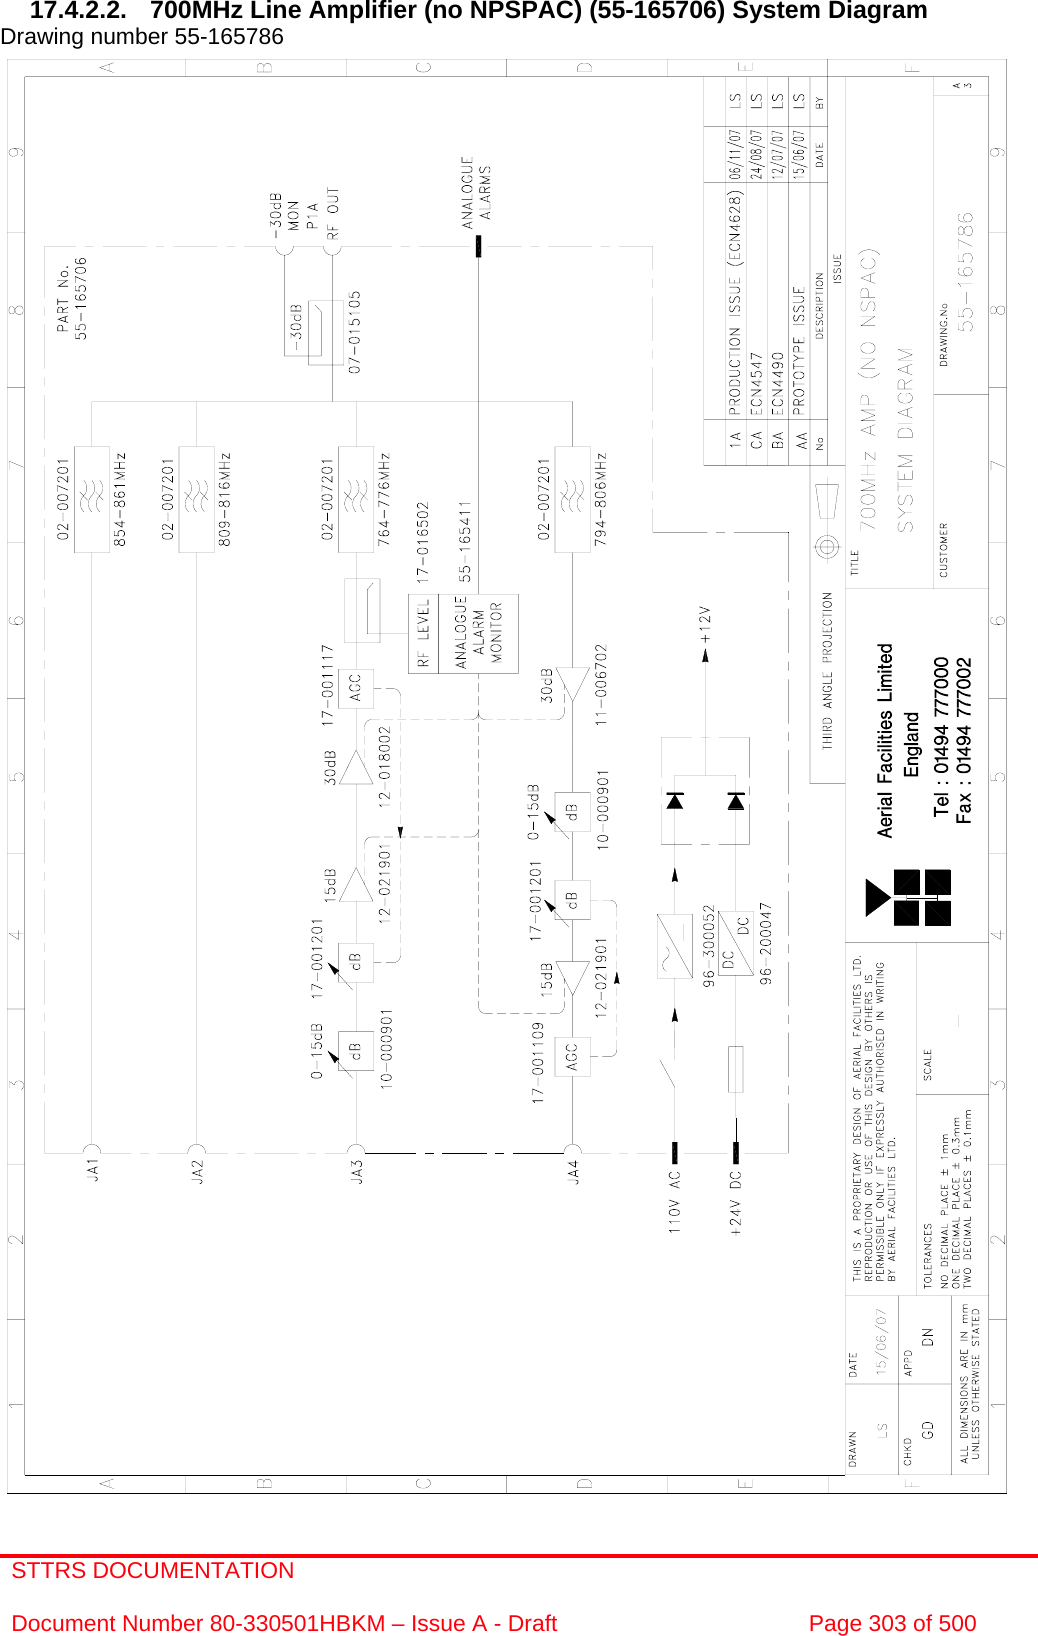 STTRS DOCUMENTATION  Document Number 80-330501HBKM – Issue A - Draft  Page 303 of 500   17.4.2.2.  700MHz Line Amplifier (no NPSPAC) (55-165706) System Diagram  Drawing number 55-165786                                                       